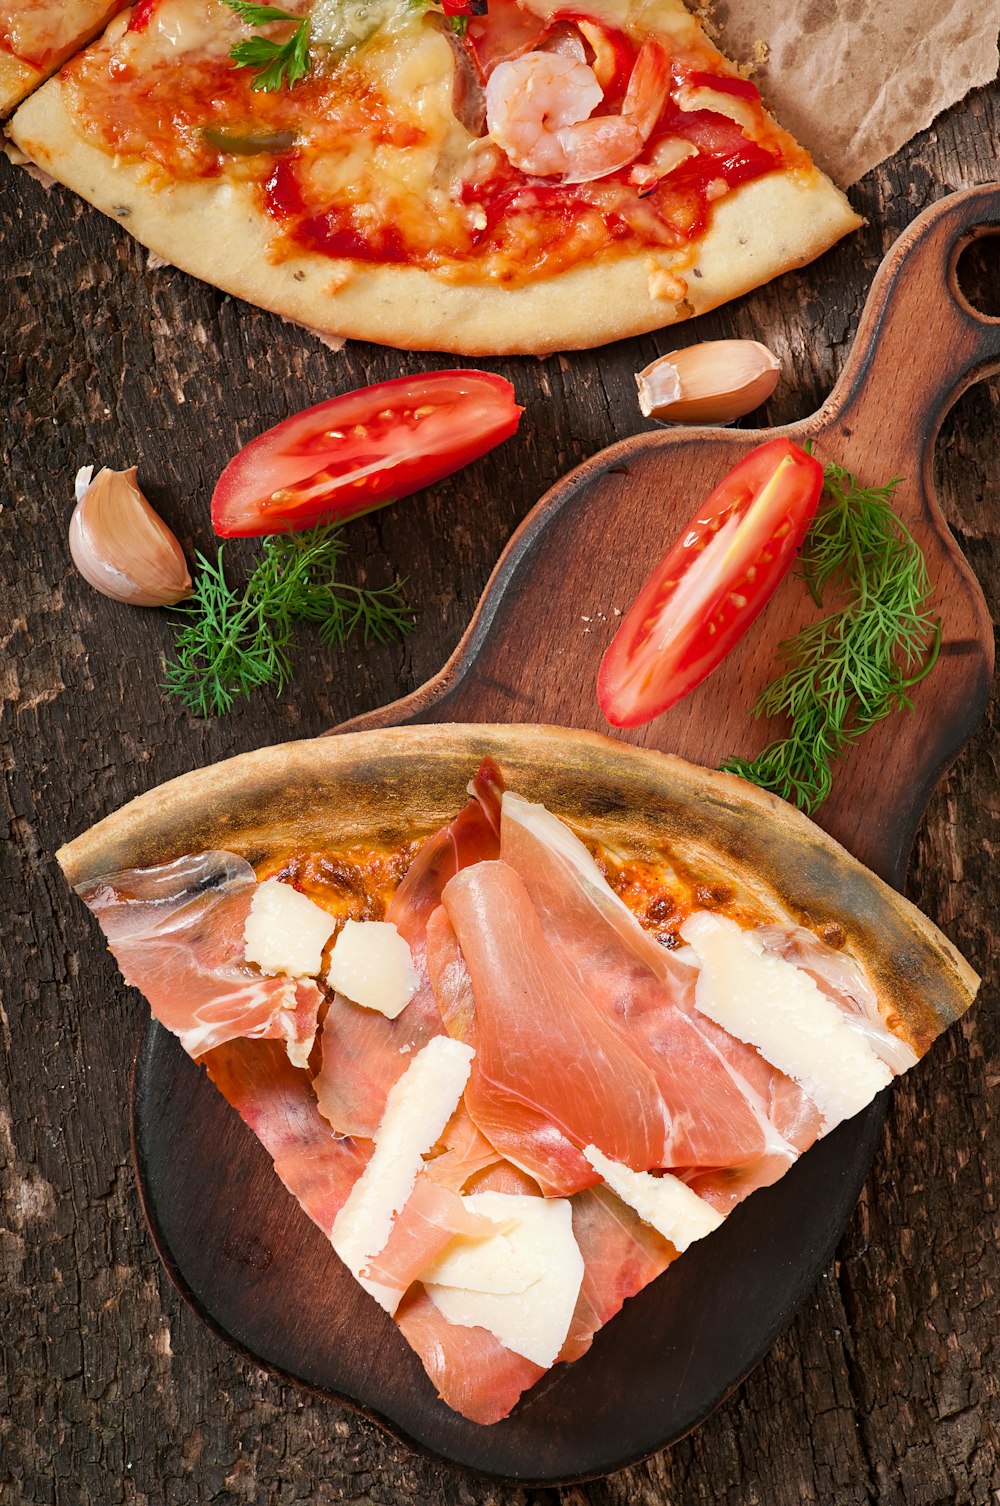 a pizza with tomatoes and cheese